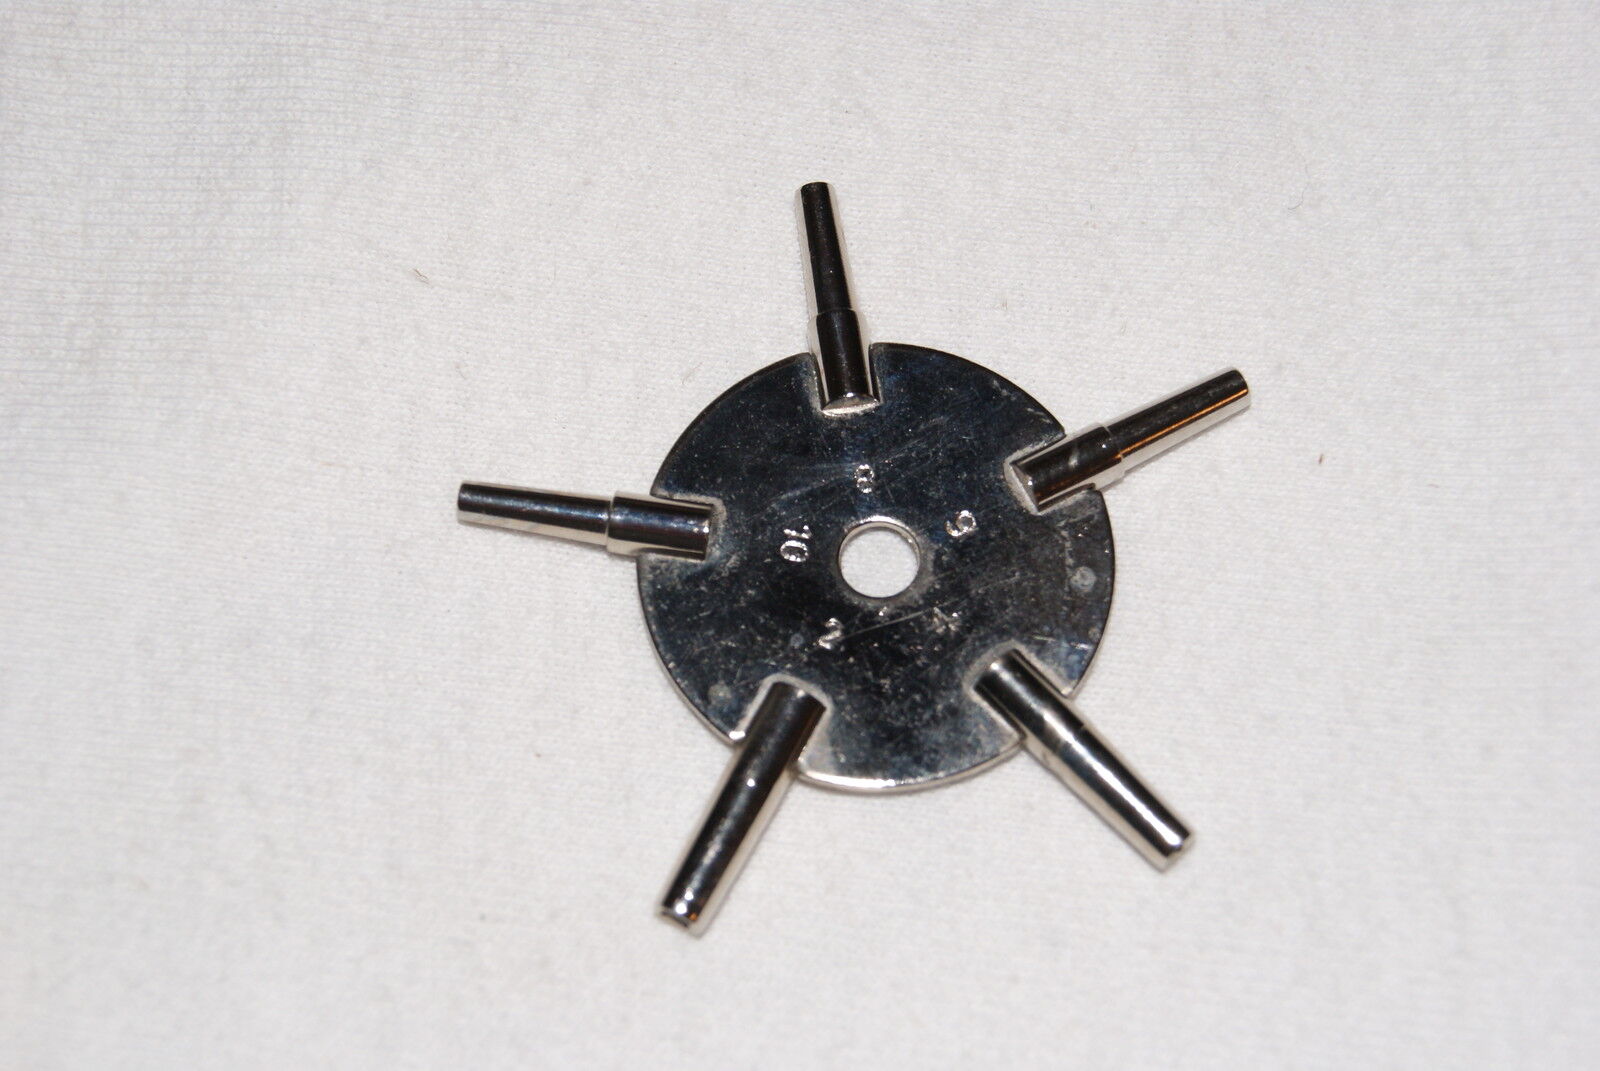 NICKELLED  5-PRONG WATCH KEY SIZES 2,4,6,8,10  NEW WATCH PARTS